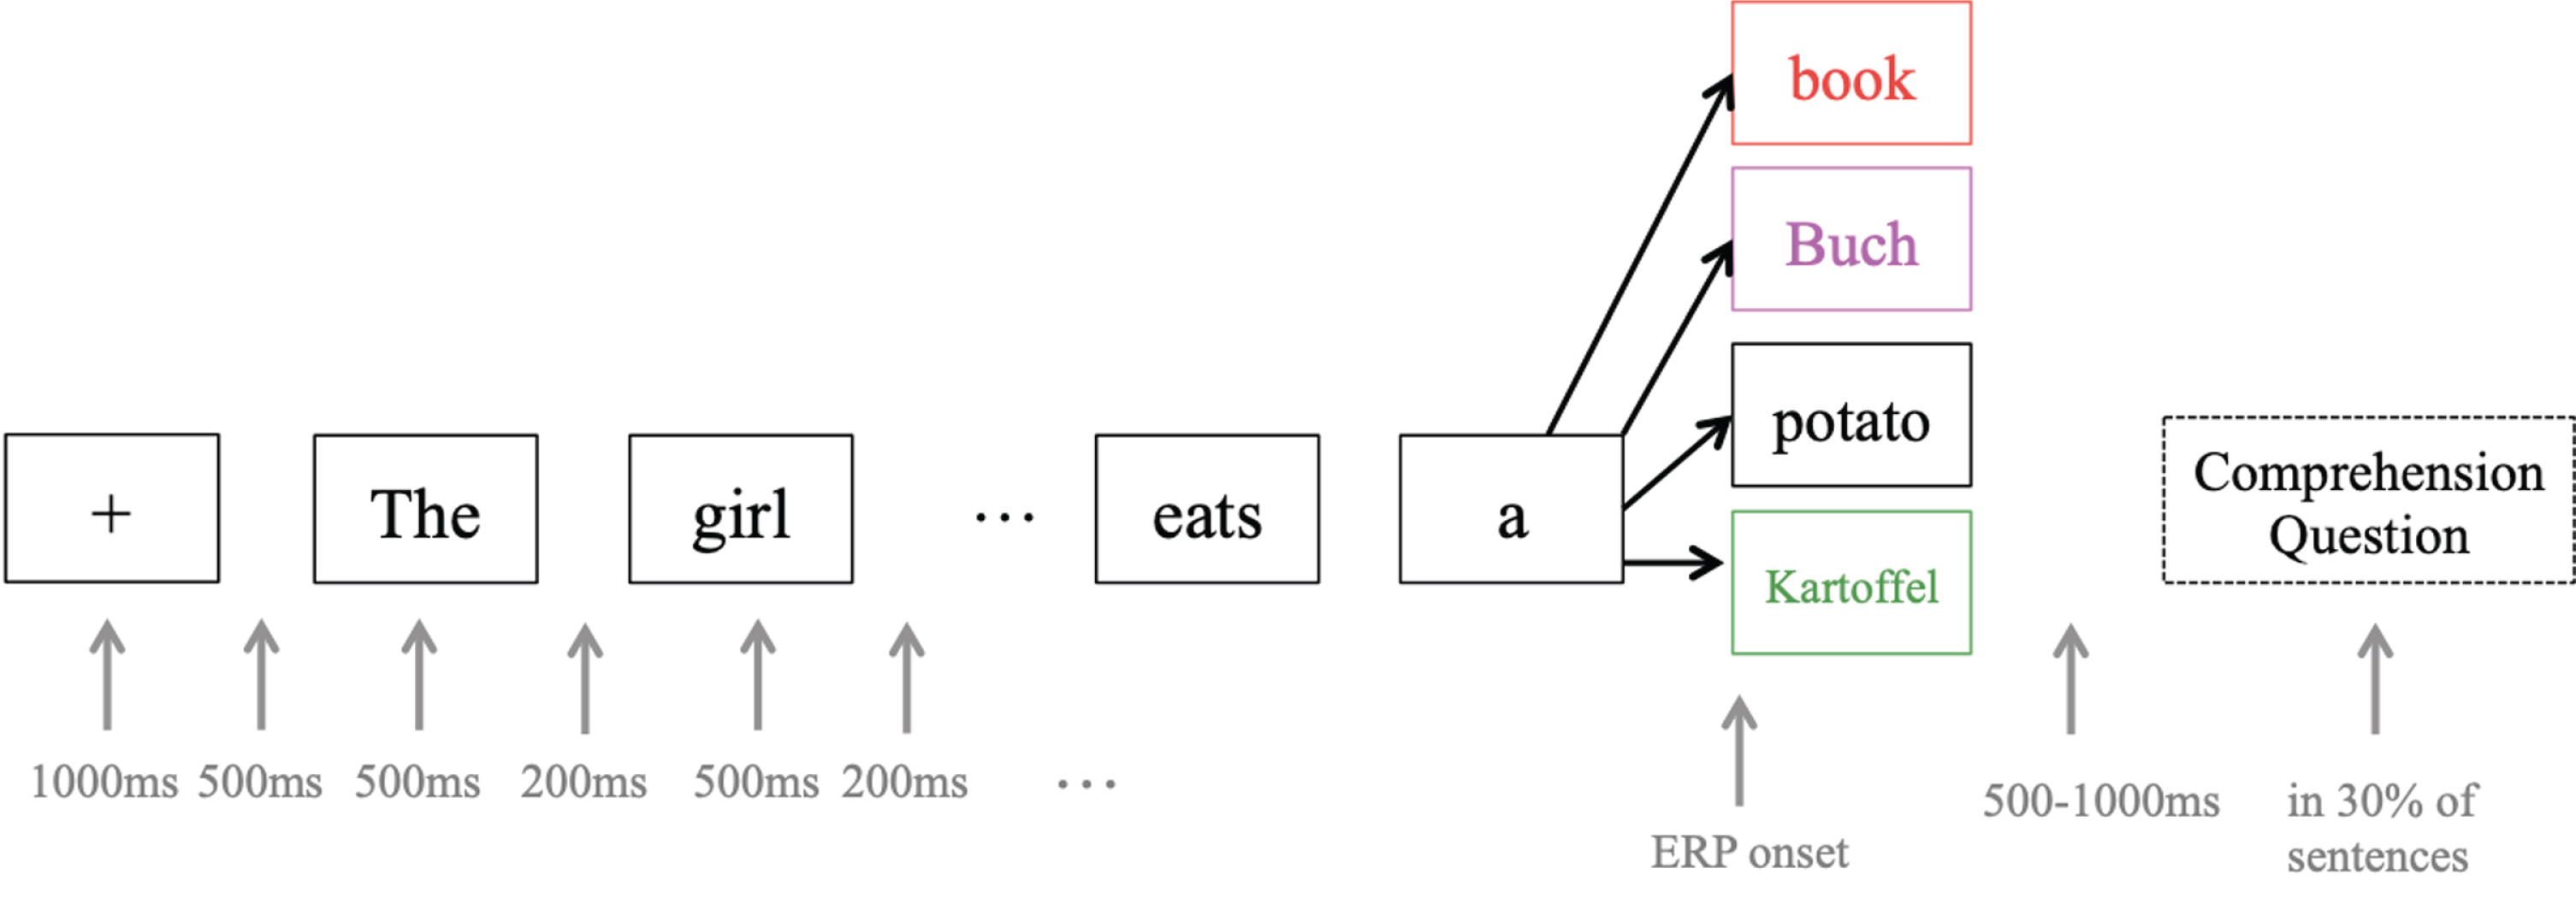 ERP experiment design. Each target word (e.g. book) appeared in at least four different sentences and conditions in order to avoid prediction effects. ERPs were recorded from the onset of the target word. The colors used for target words are the same as in Fig. 6: red = no-switching incongruent, pink = switching incongruent, black = no-switching congruent, green = switching congruent.